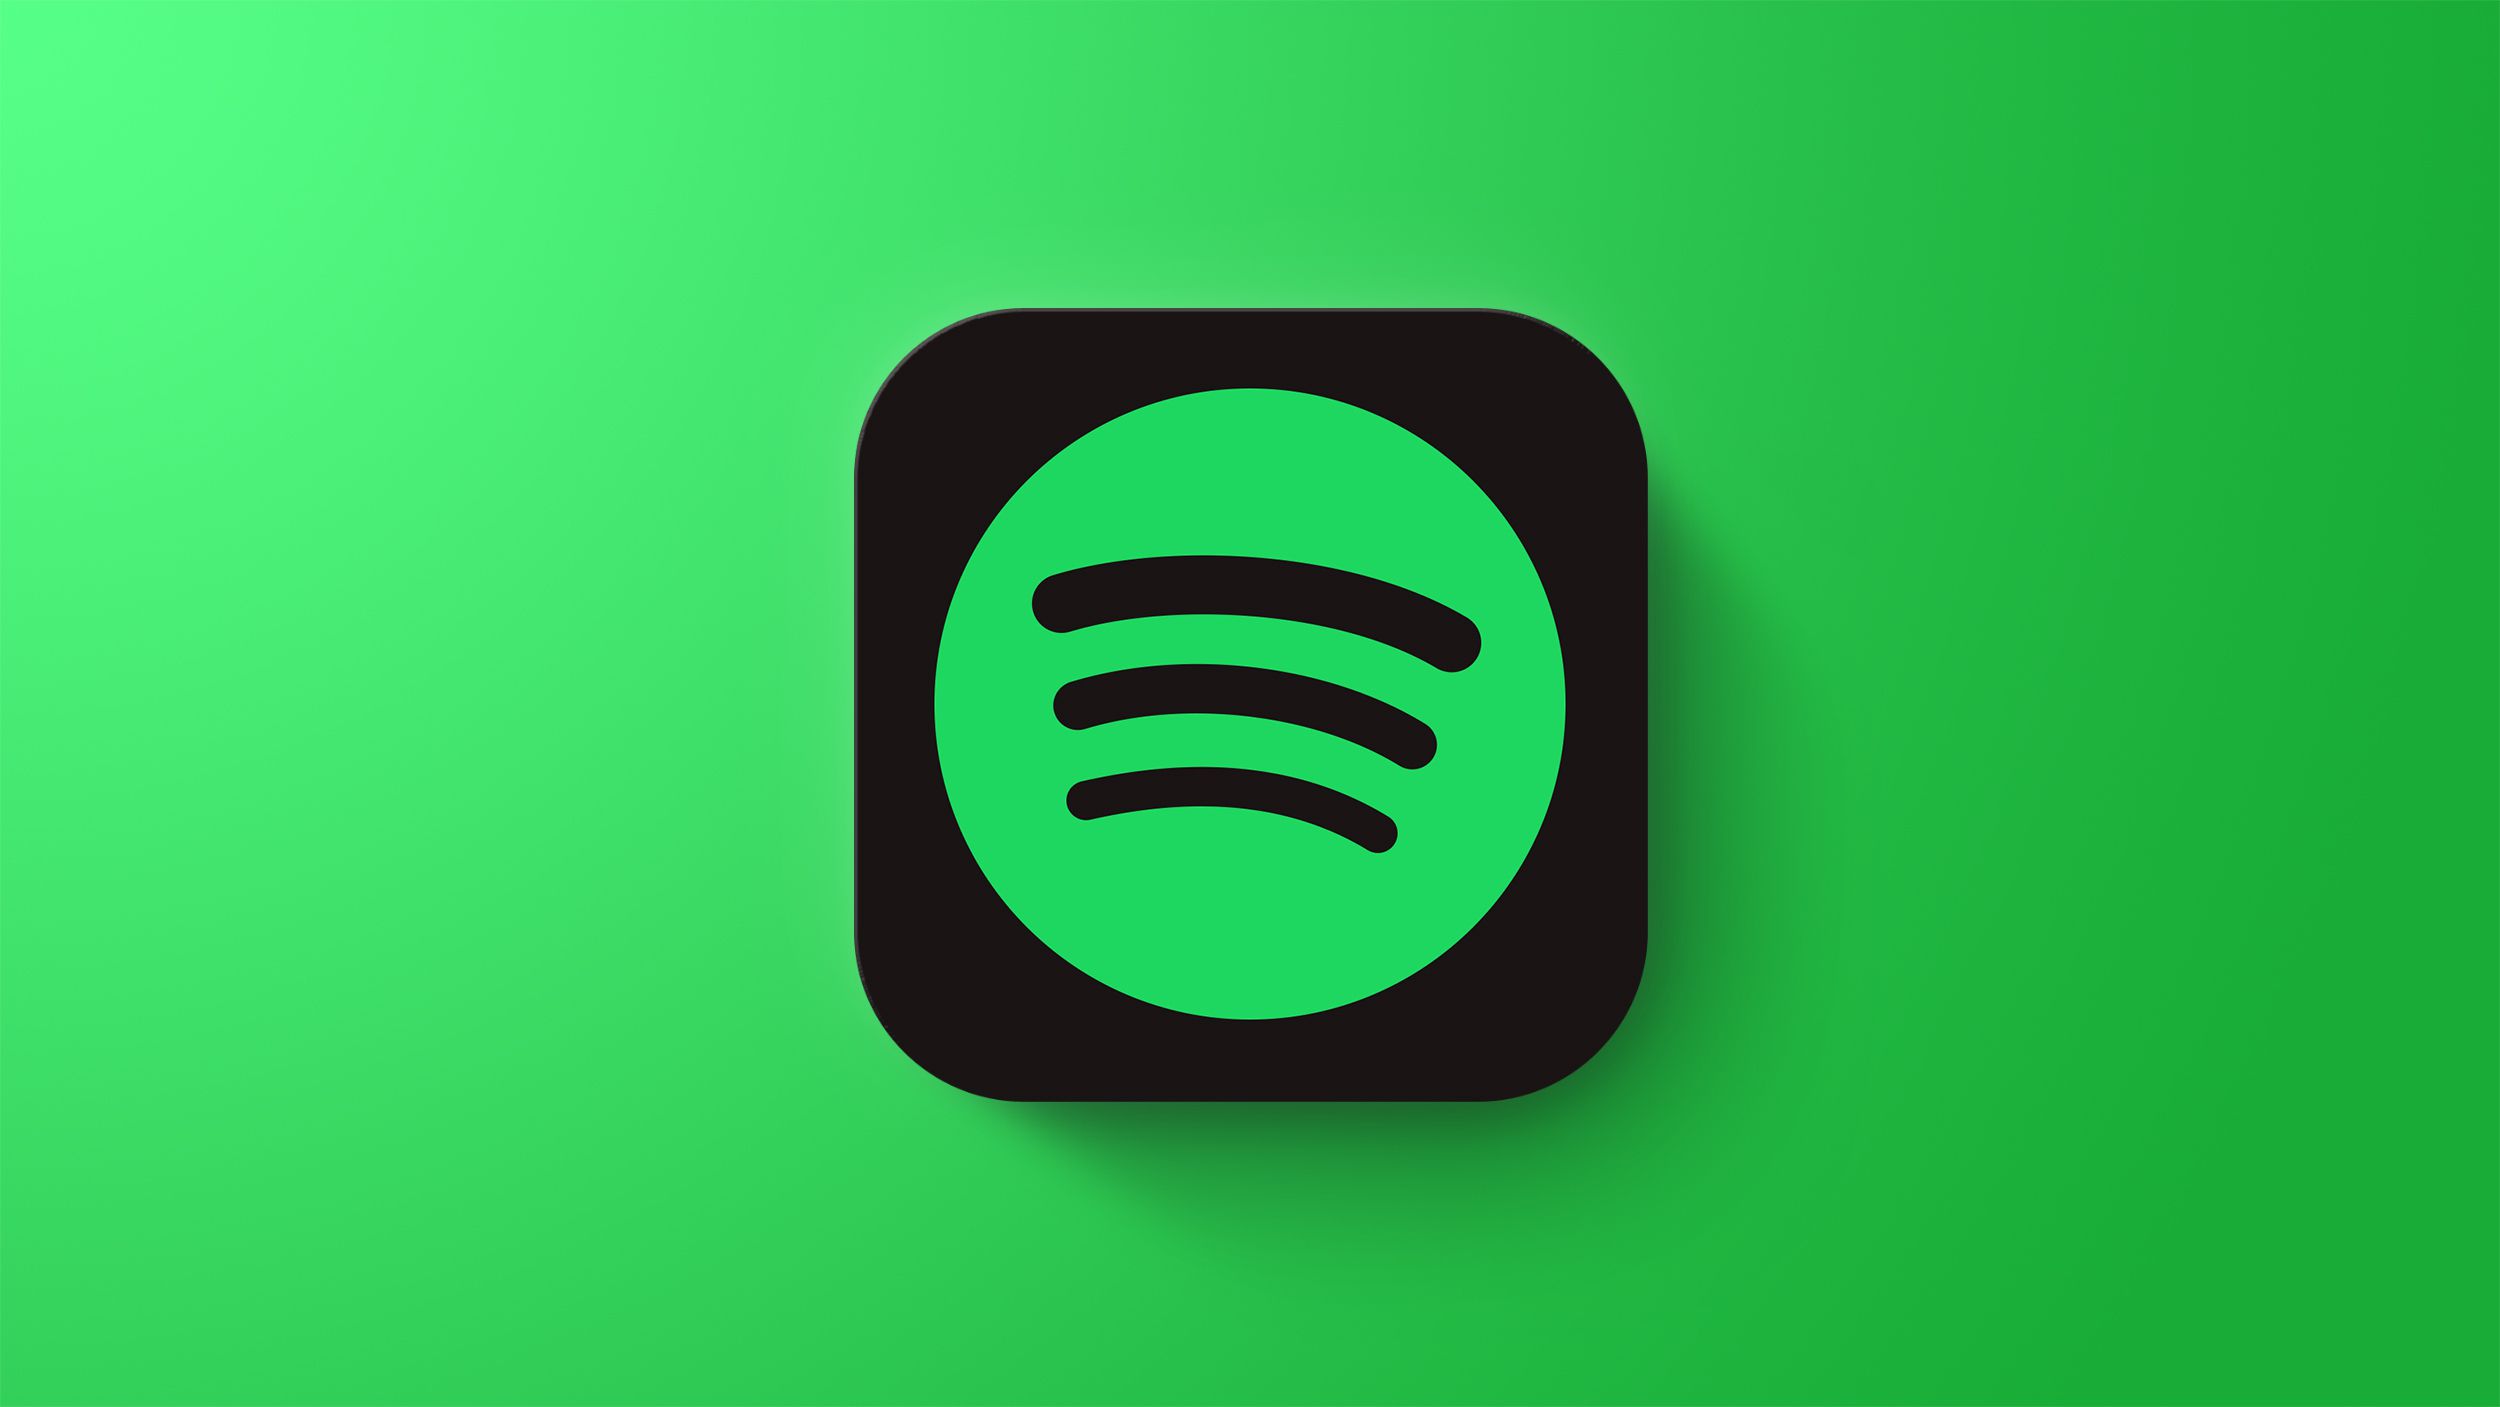 Spotify Partners With Delta to Provide Free In-Flight Music and Podcasts Service